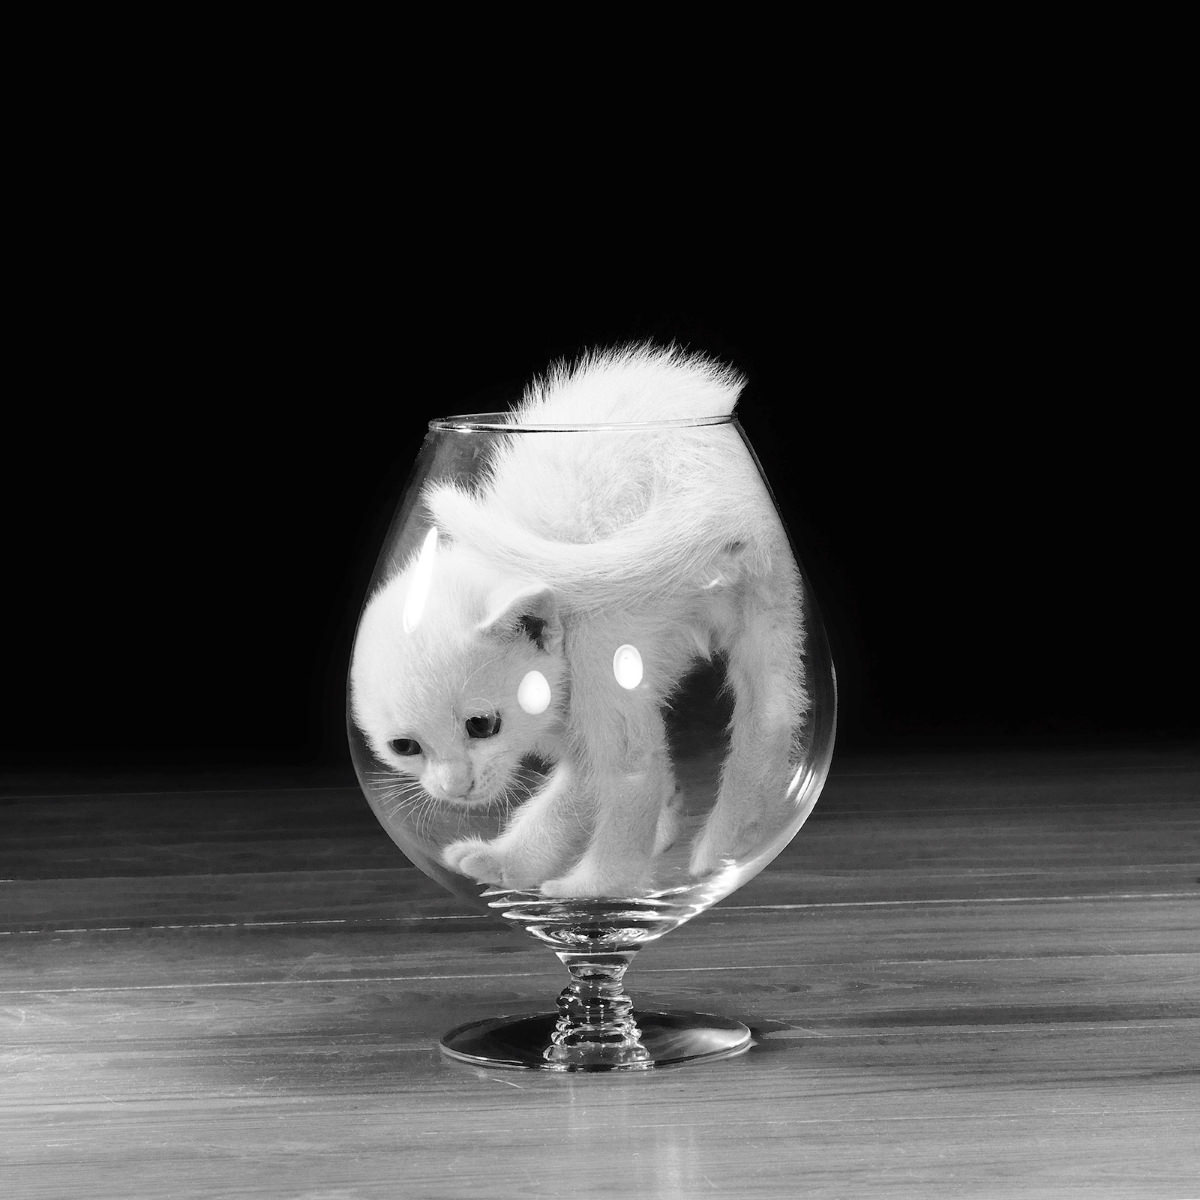 An American shorthair squeezes into a glass in 1960.